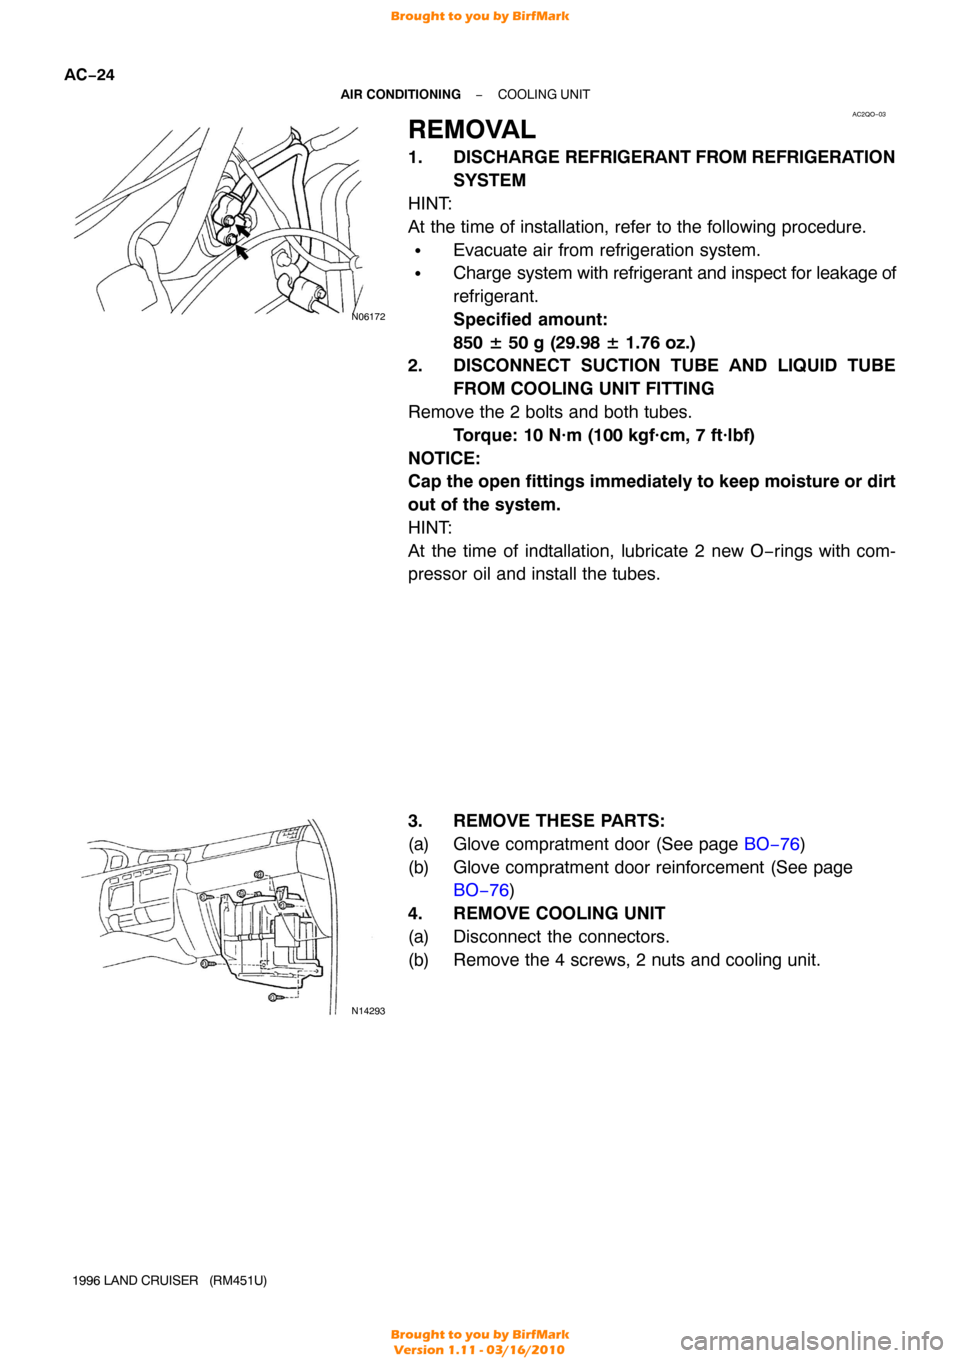 TOYOTA LAND CRUISER 1996 J80 Workshop Manual AC2QO−03
N06172
N14293
AC−24
−
AIR CONDITIONING COOLING UNIT
1996 LAND CRUISER   (RM451U)
REMOVAL
1. DISCHARGE  REFRIGERANT FROM REFRIGERA TION
SYSTEM
HINT:
At the time of installation, refer to